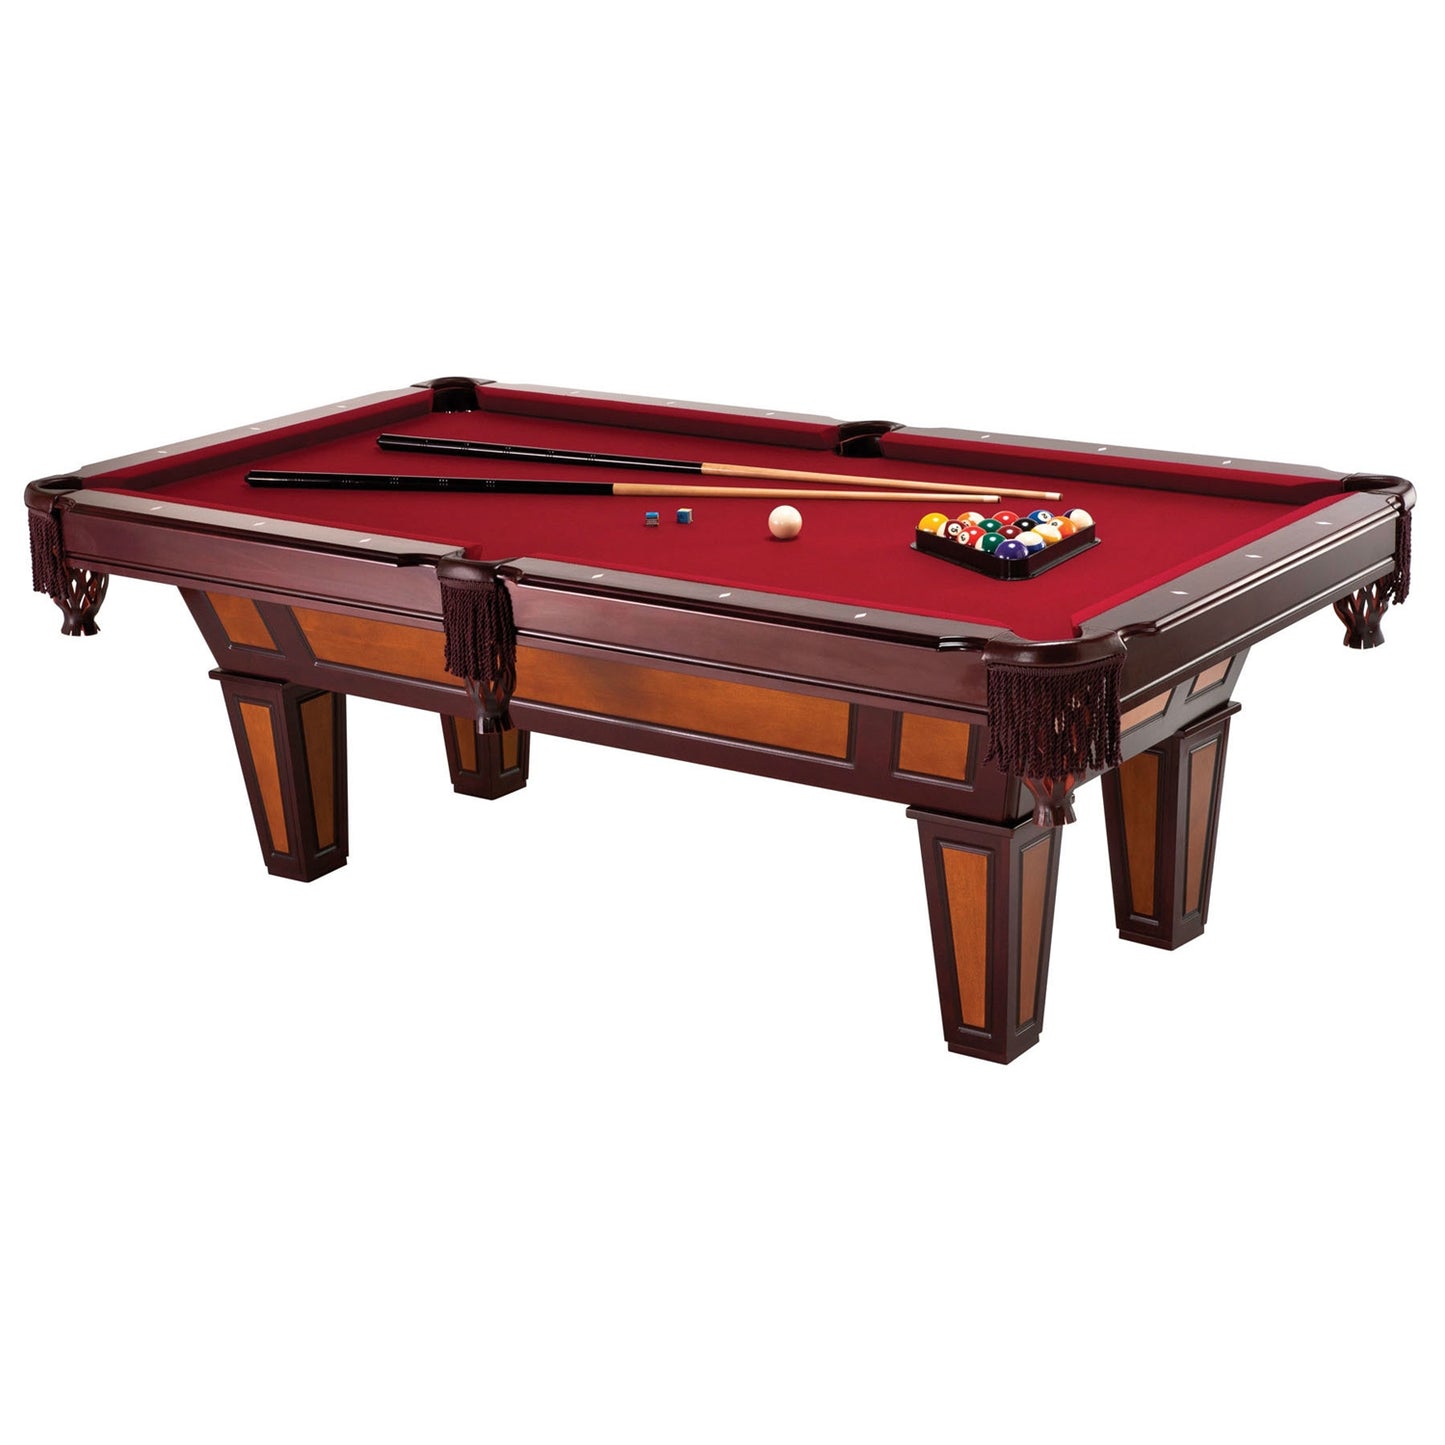 7 Ft Pool Table with Red Burgundy Wool Top and Fringe Drop Pockets